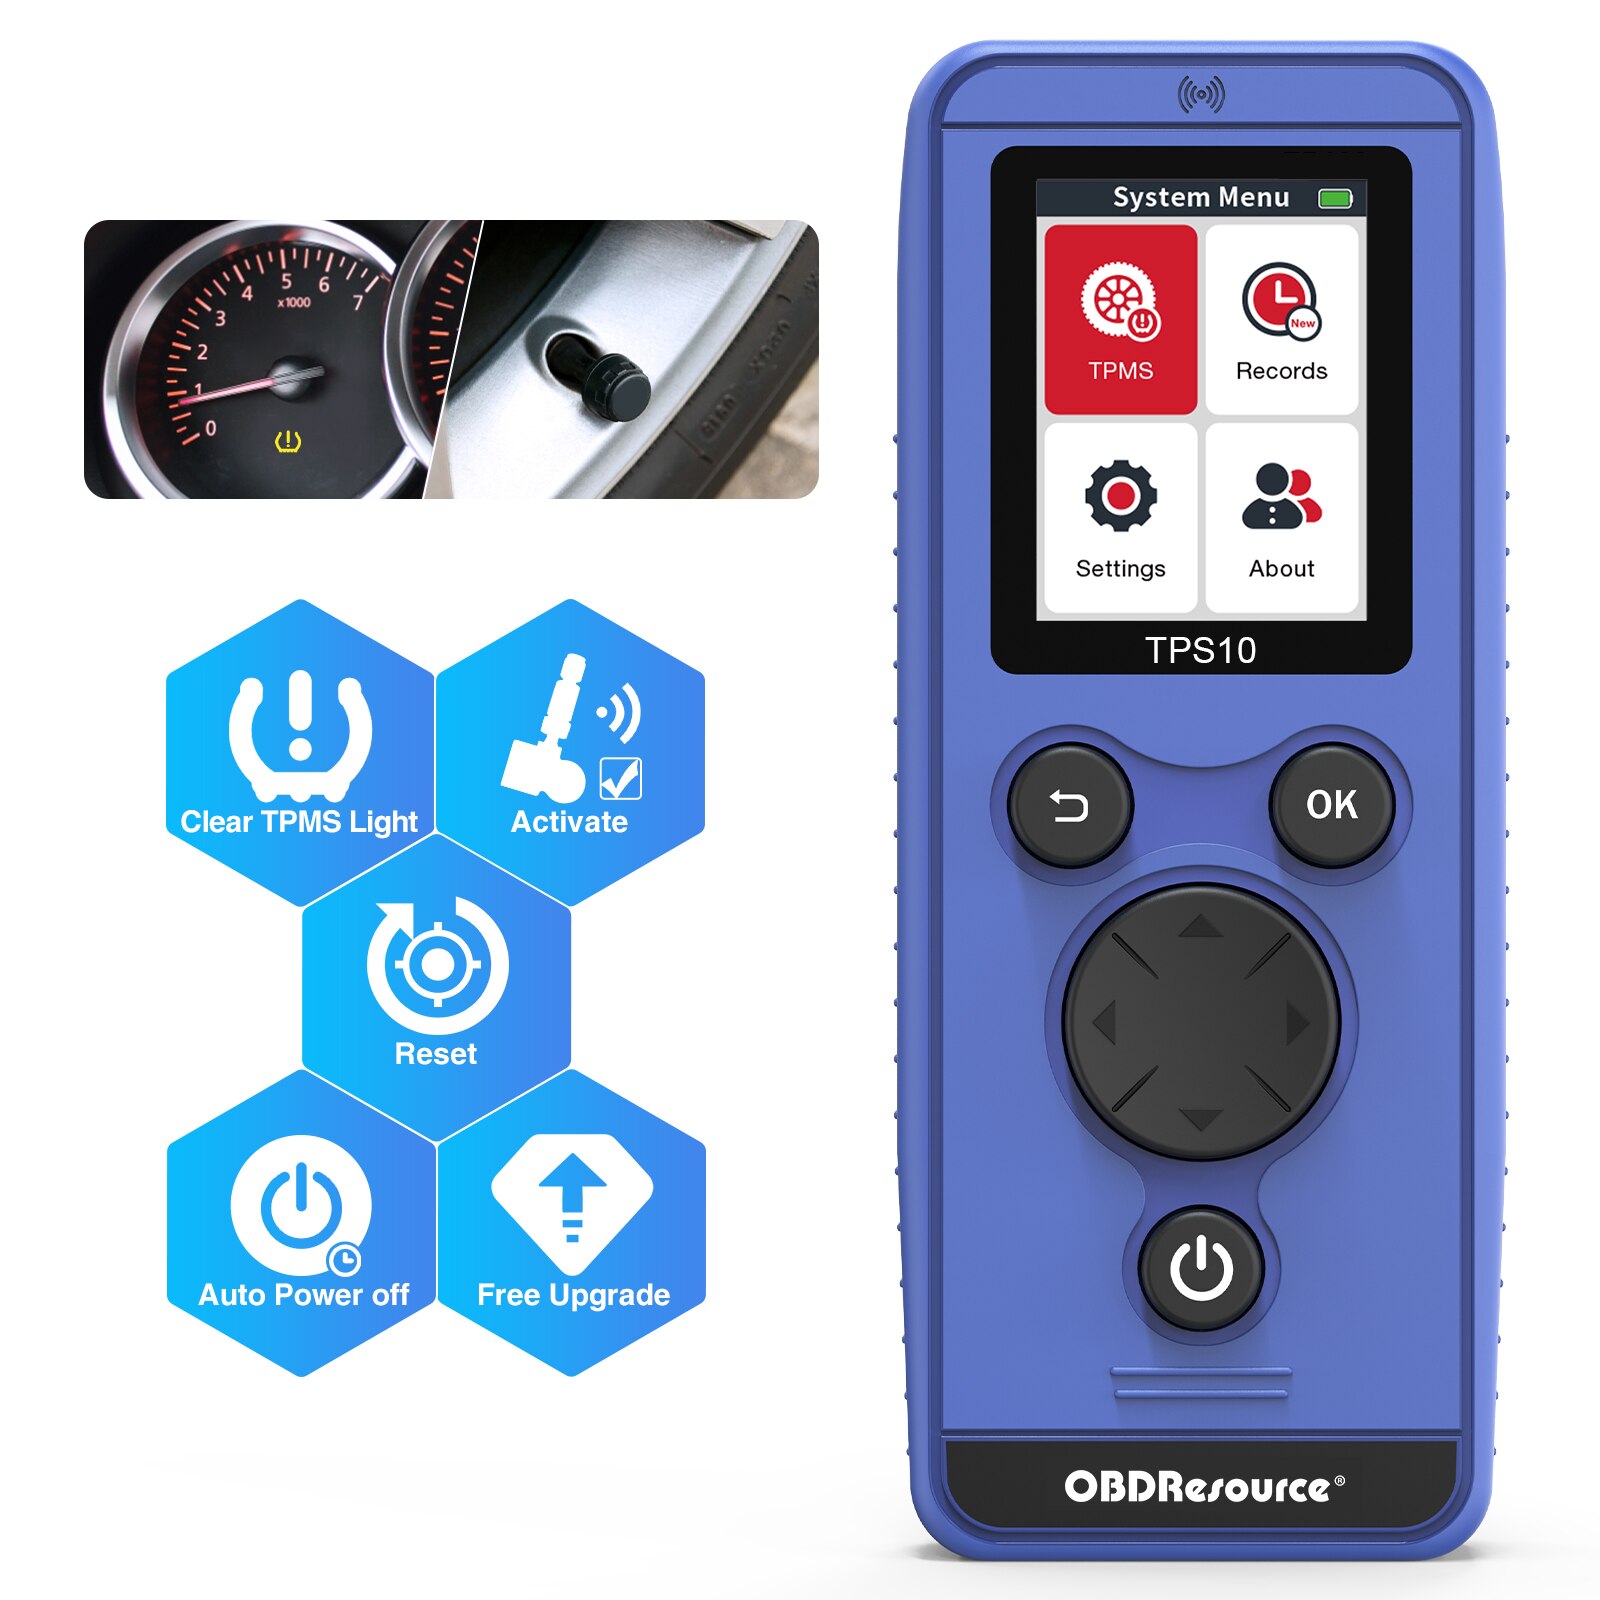 OBDResource Universal TPMS Reset Tool TPS10 For BMW Audi Ford Jeep Mitsubishi Toyota Fiat Auto Tire Pressure Monitoring System